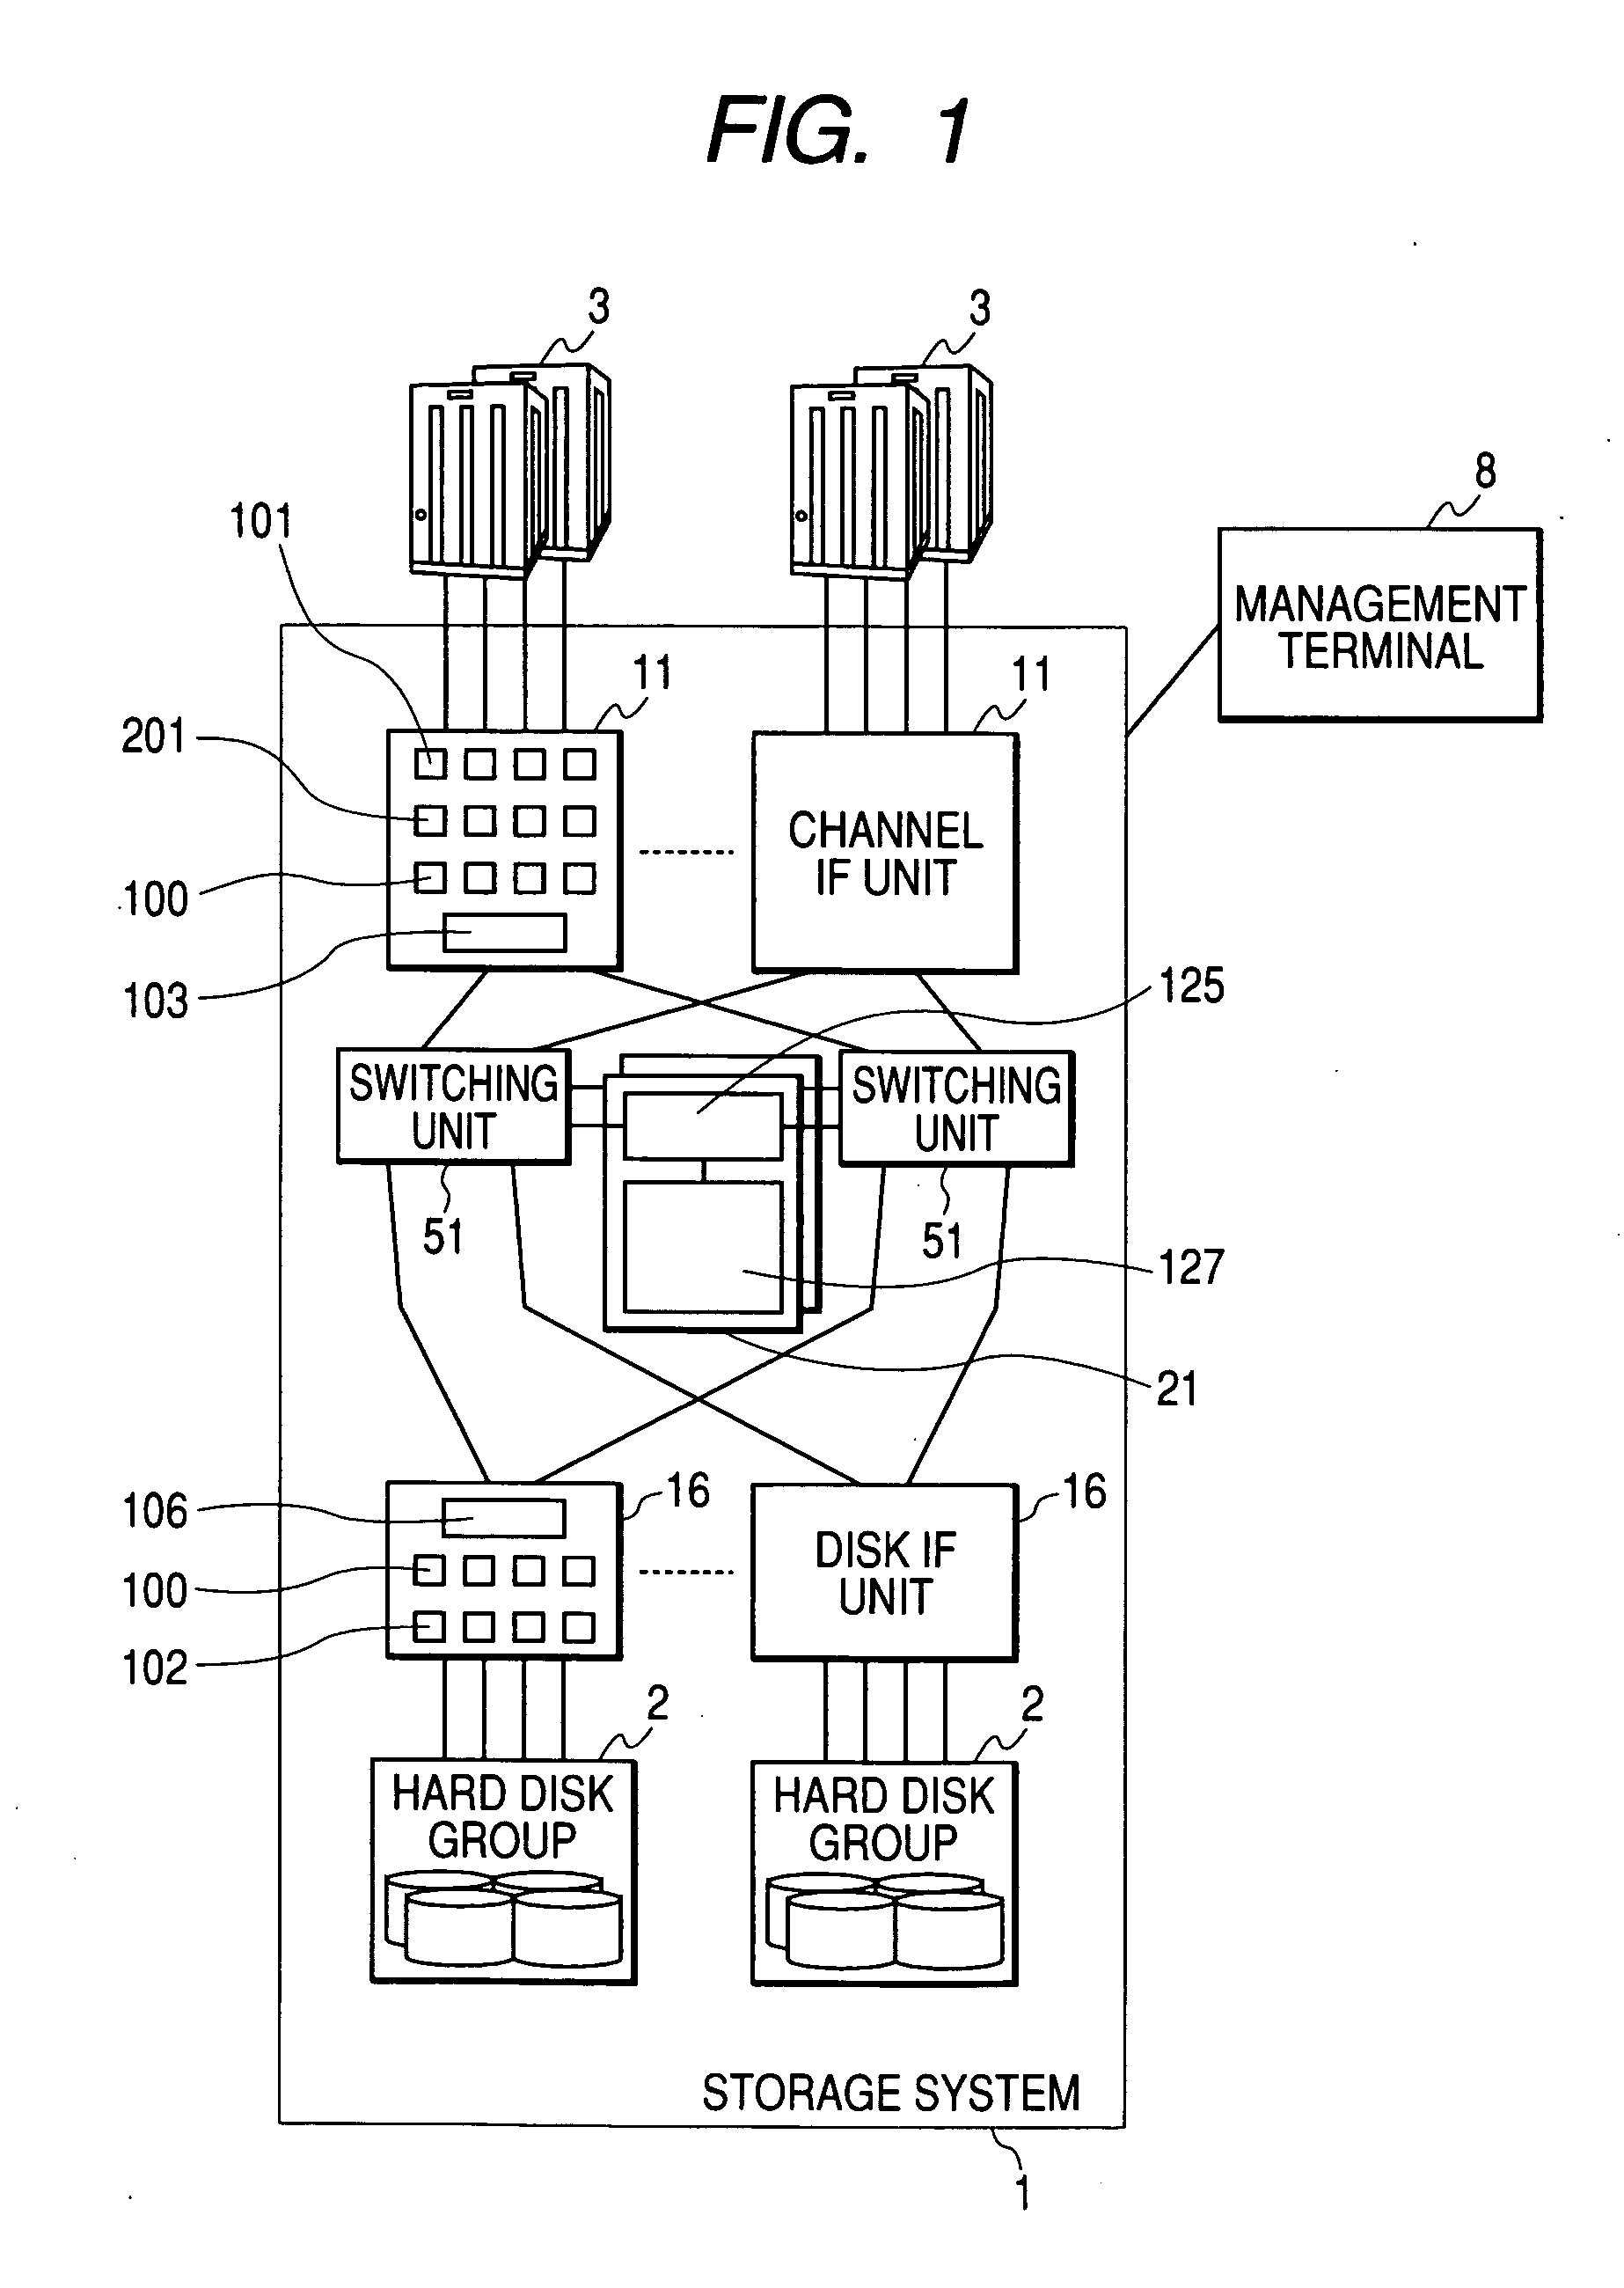 Storage system executing encryption and decryption processing